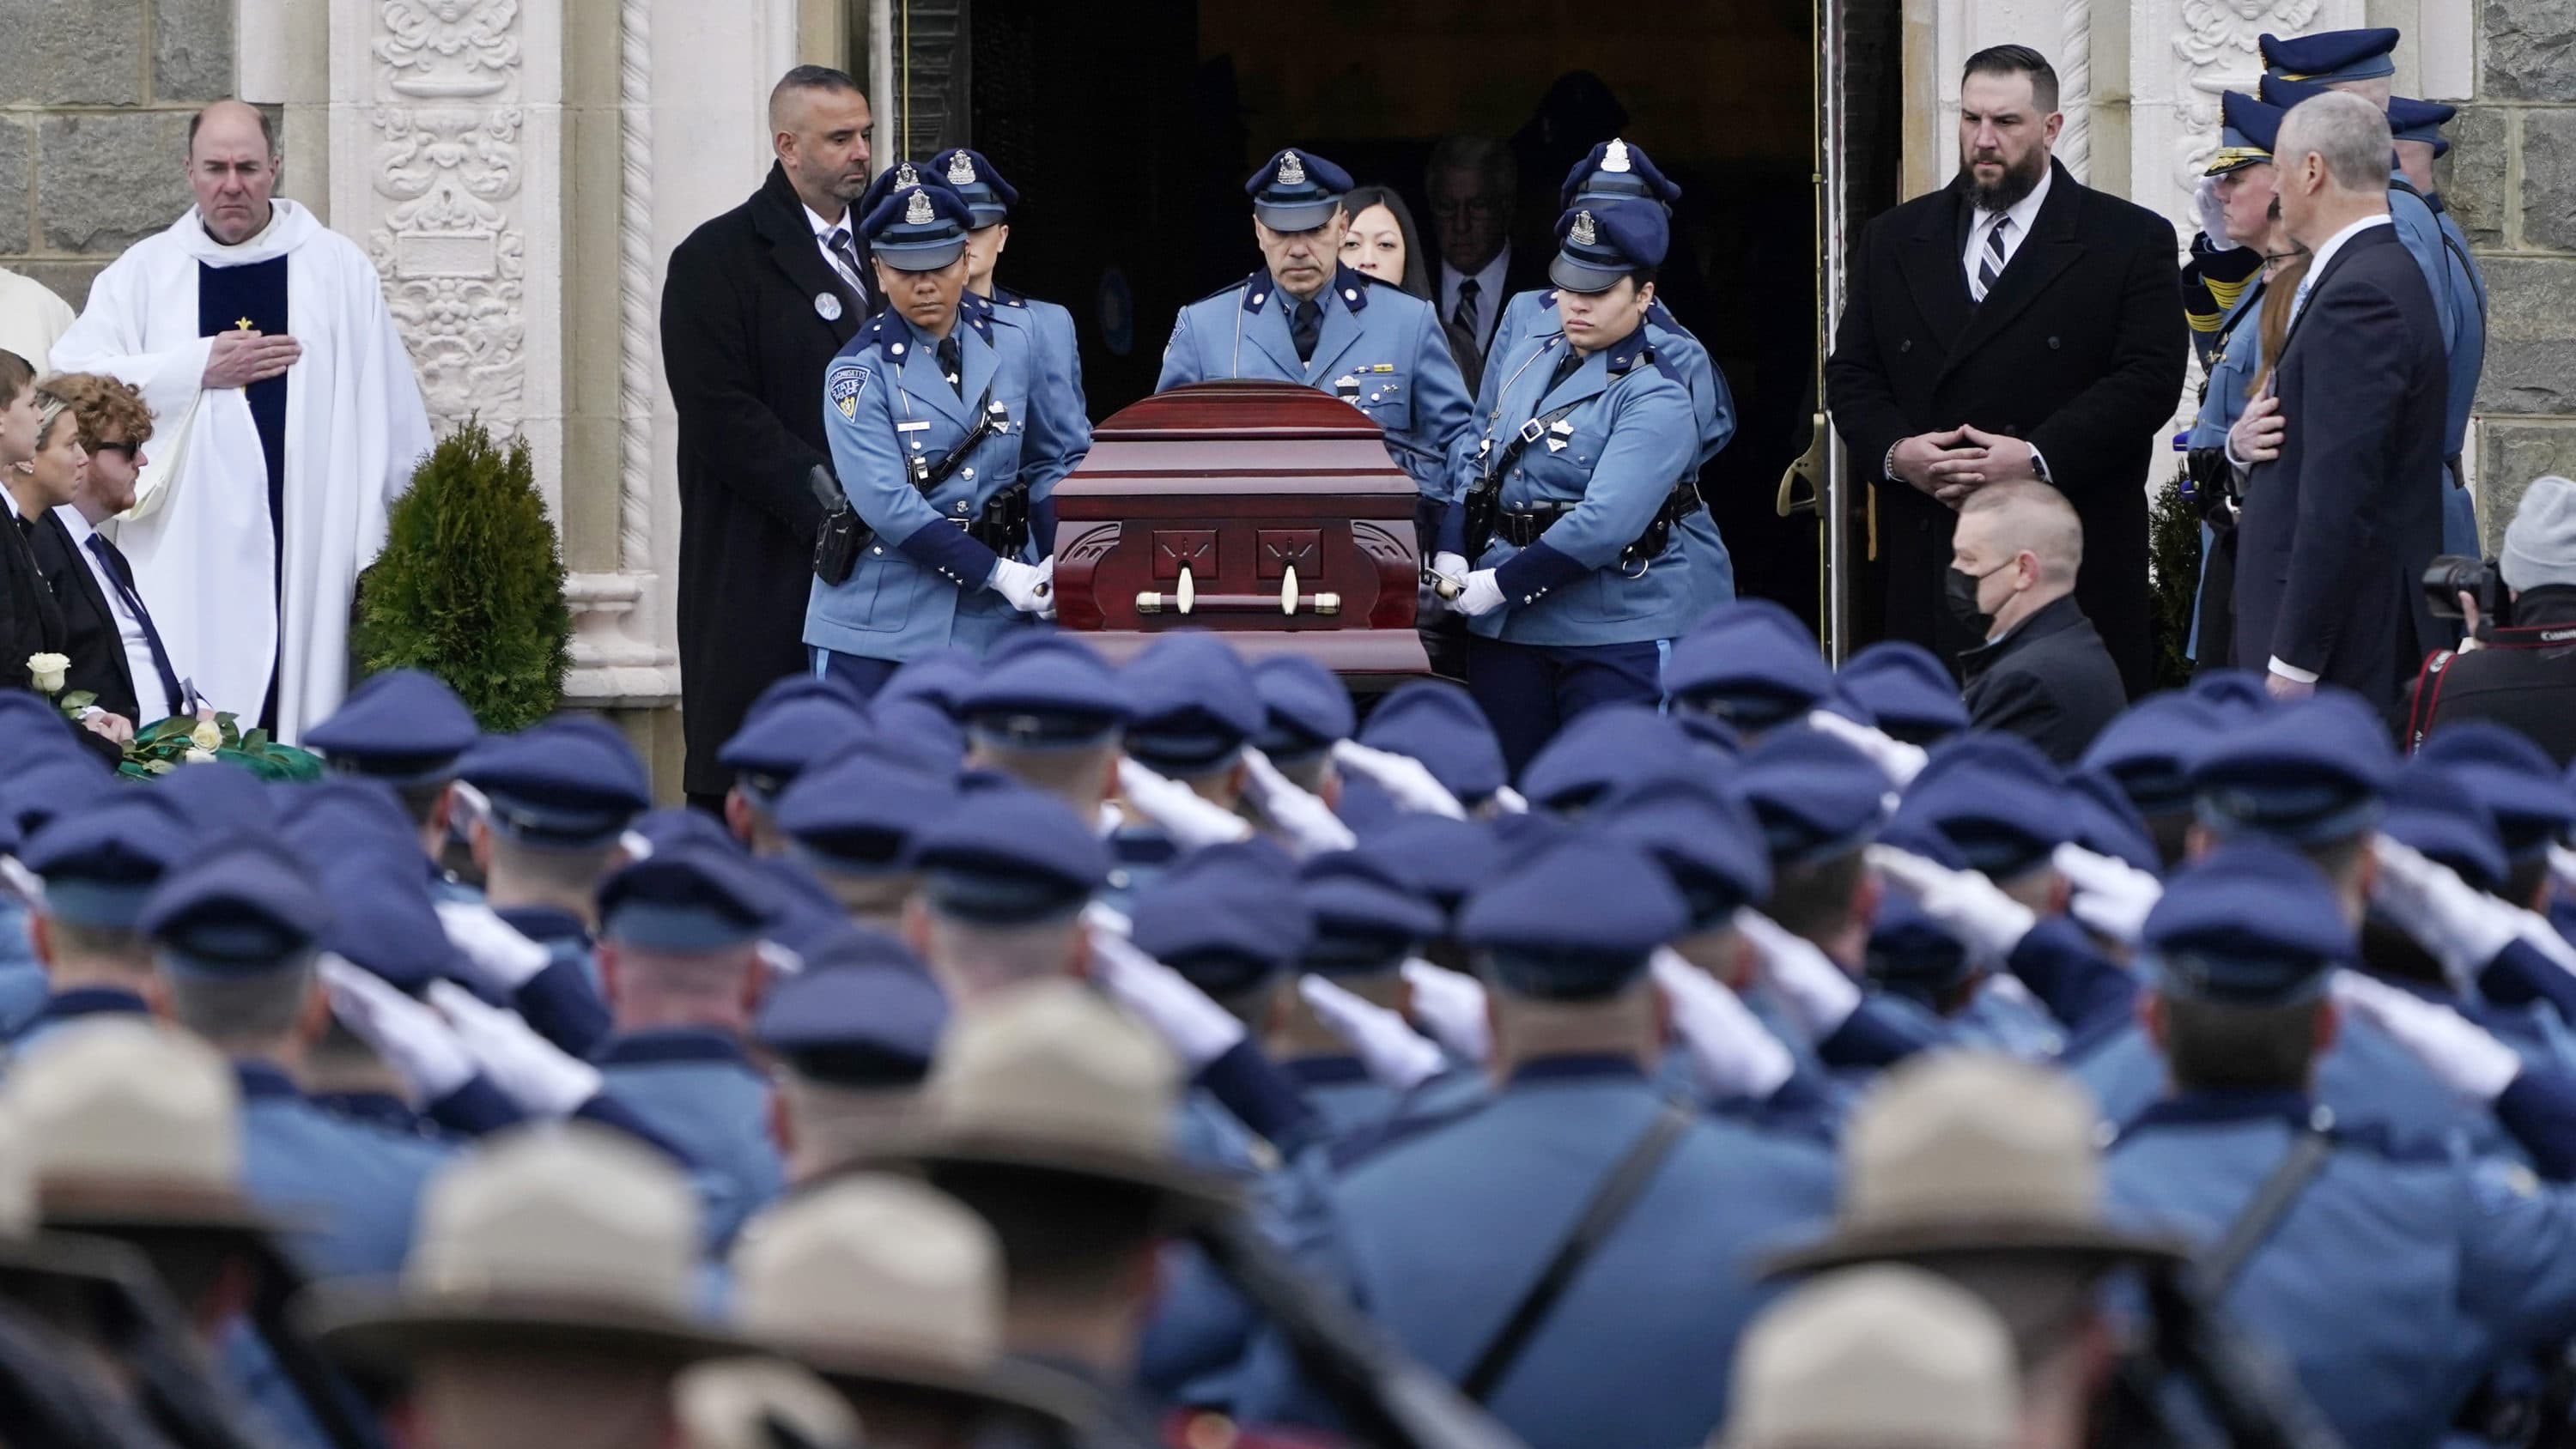 The casket of Massachusetts State Police Trooper Tamar Bucci is carried by female troopers from Saint Anthony of Padua church, March 9, 2022, in Revere, Mass. Bucci died last week after injuries she sustained when a tanker truck struck her cruiser while assisting a disabled vehicle on Interstate 93 North in Stoneham, Mass. (Charles Krupa/AP)